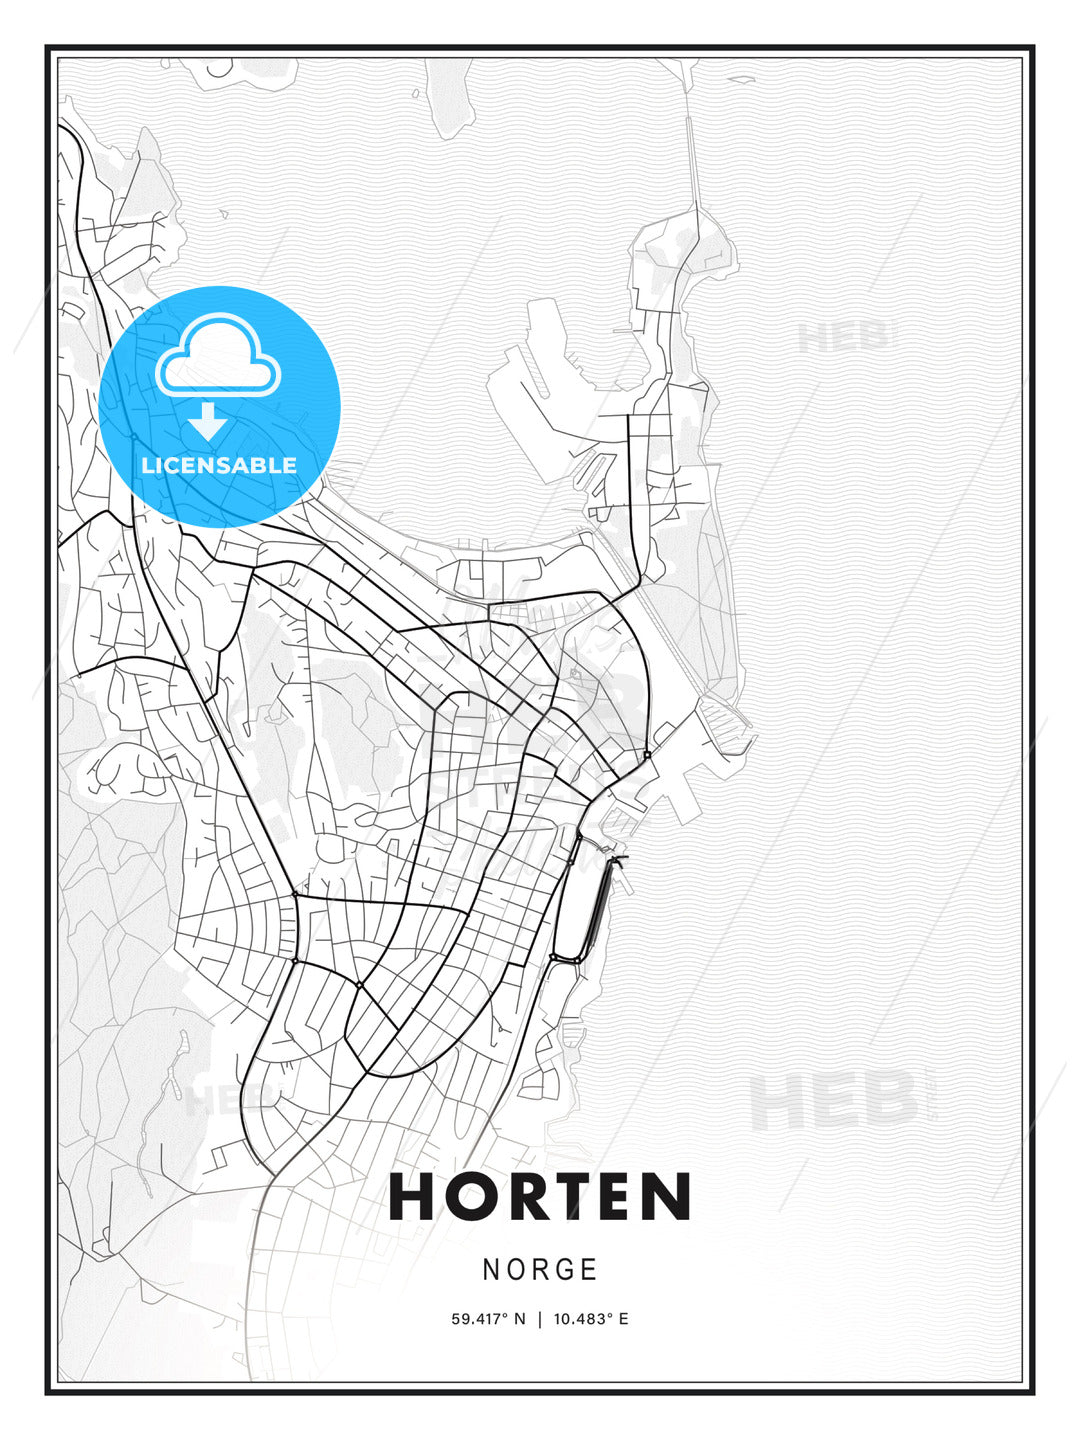 Horten, Norway, Modern Print Template in Various Formats - HEBSTREITS Sketches